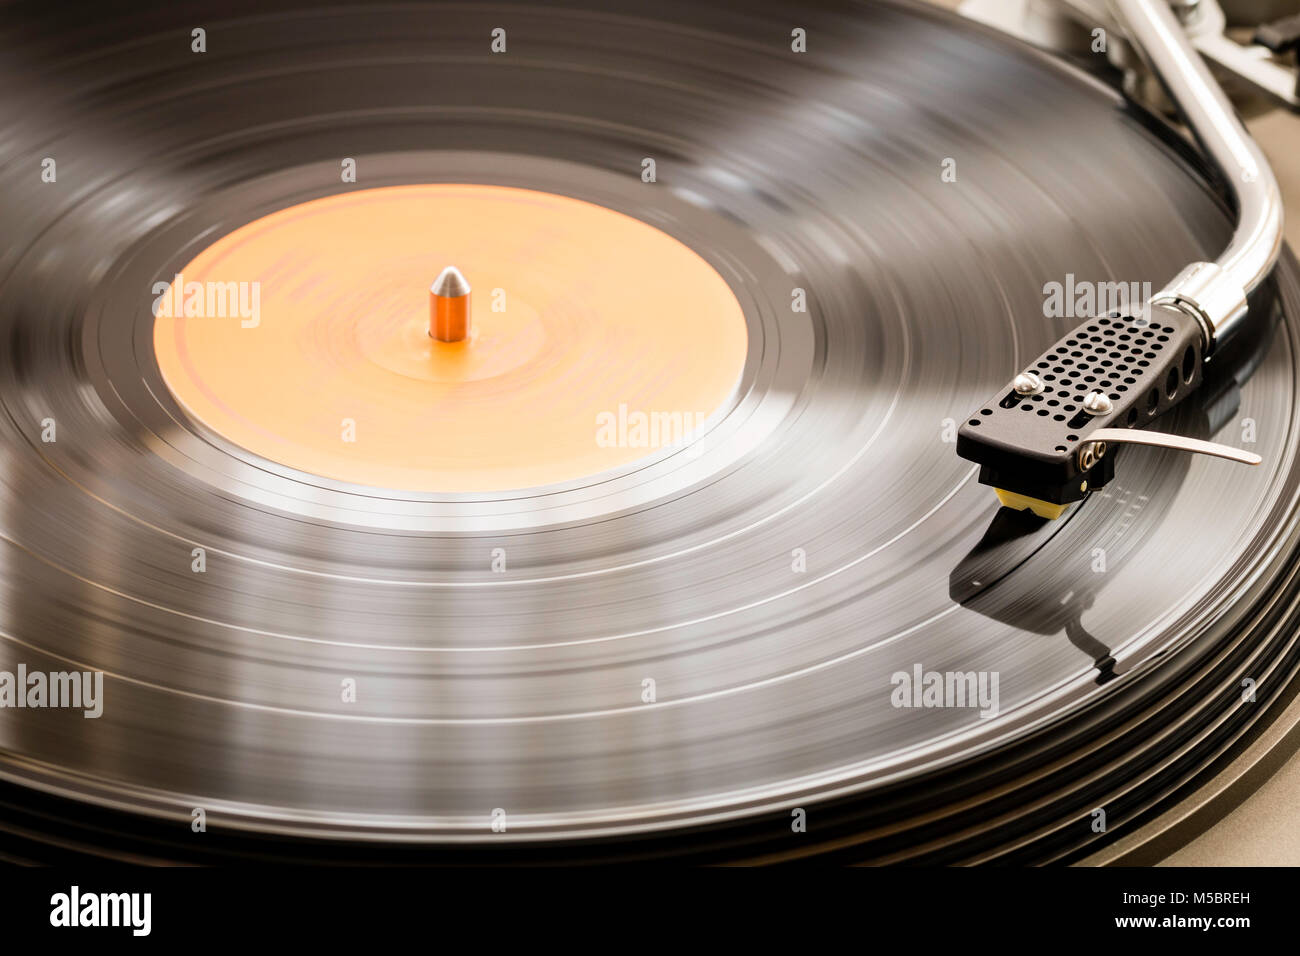 Record player deck, turntable, with 33 rpm, LP, record being played. Tone arm is an S-sharp. Stock Photo